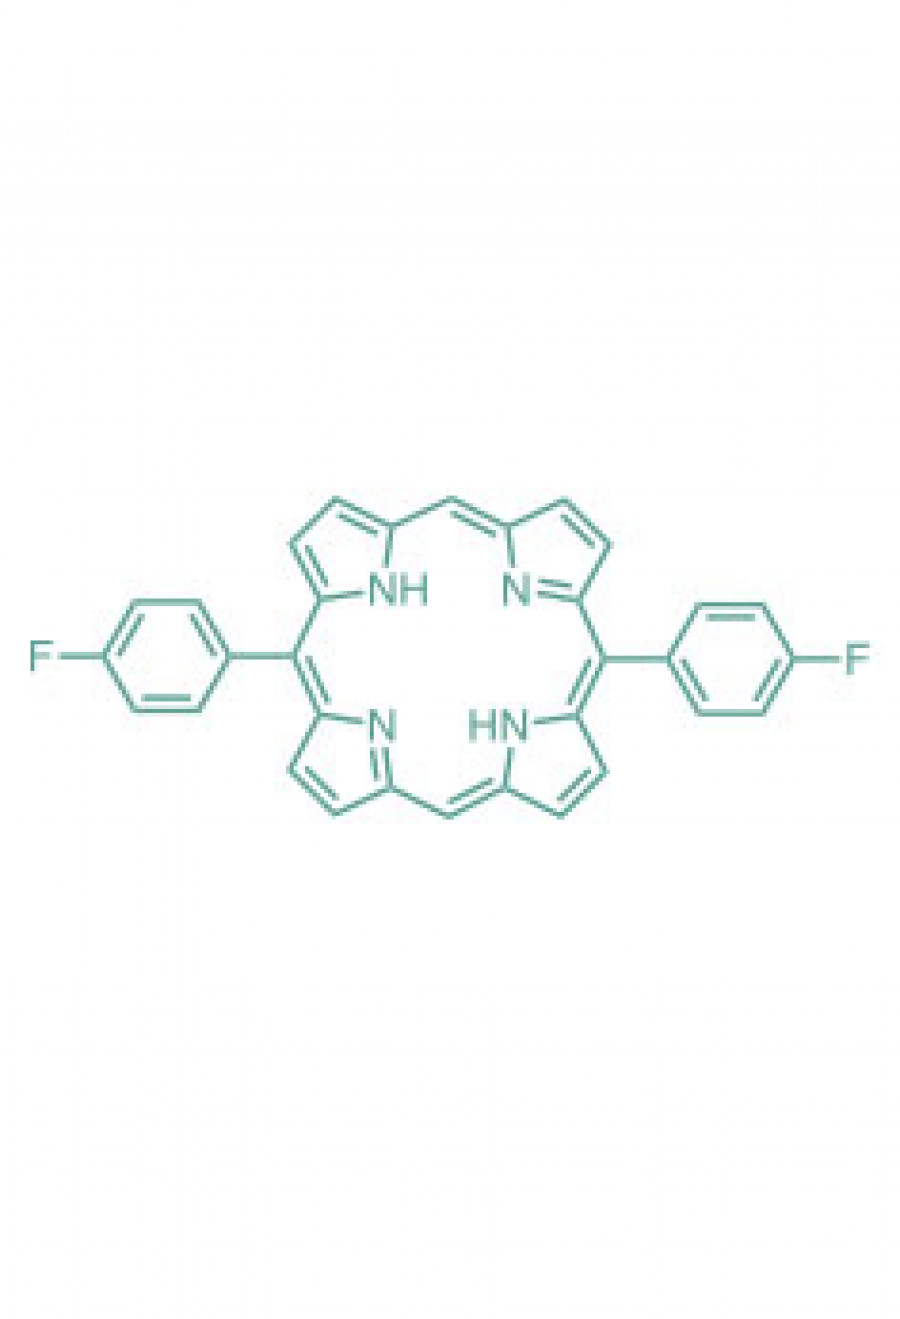 5,15-(di-4-fluorophenyl)porphyrin  | Porphychem Expert porphyrin synthesis for research & industry